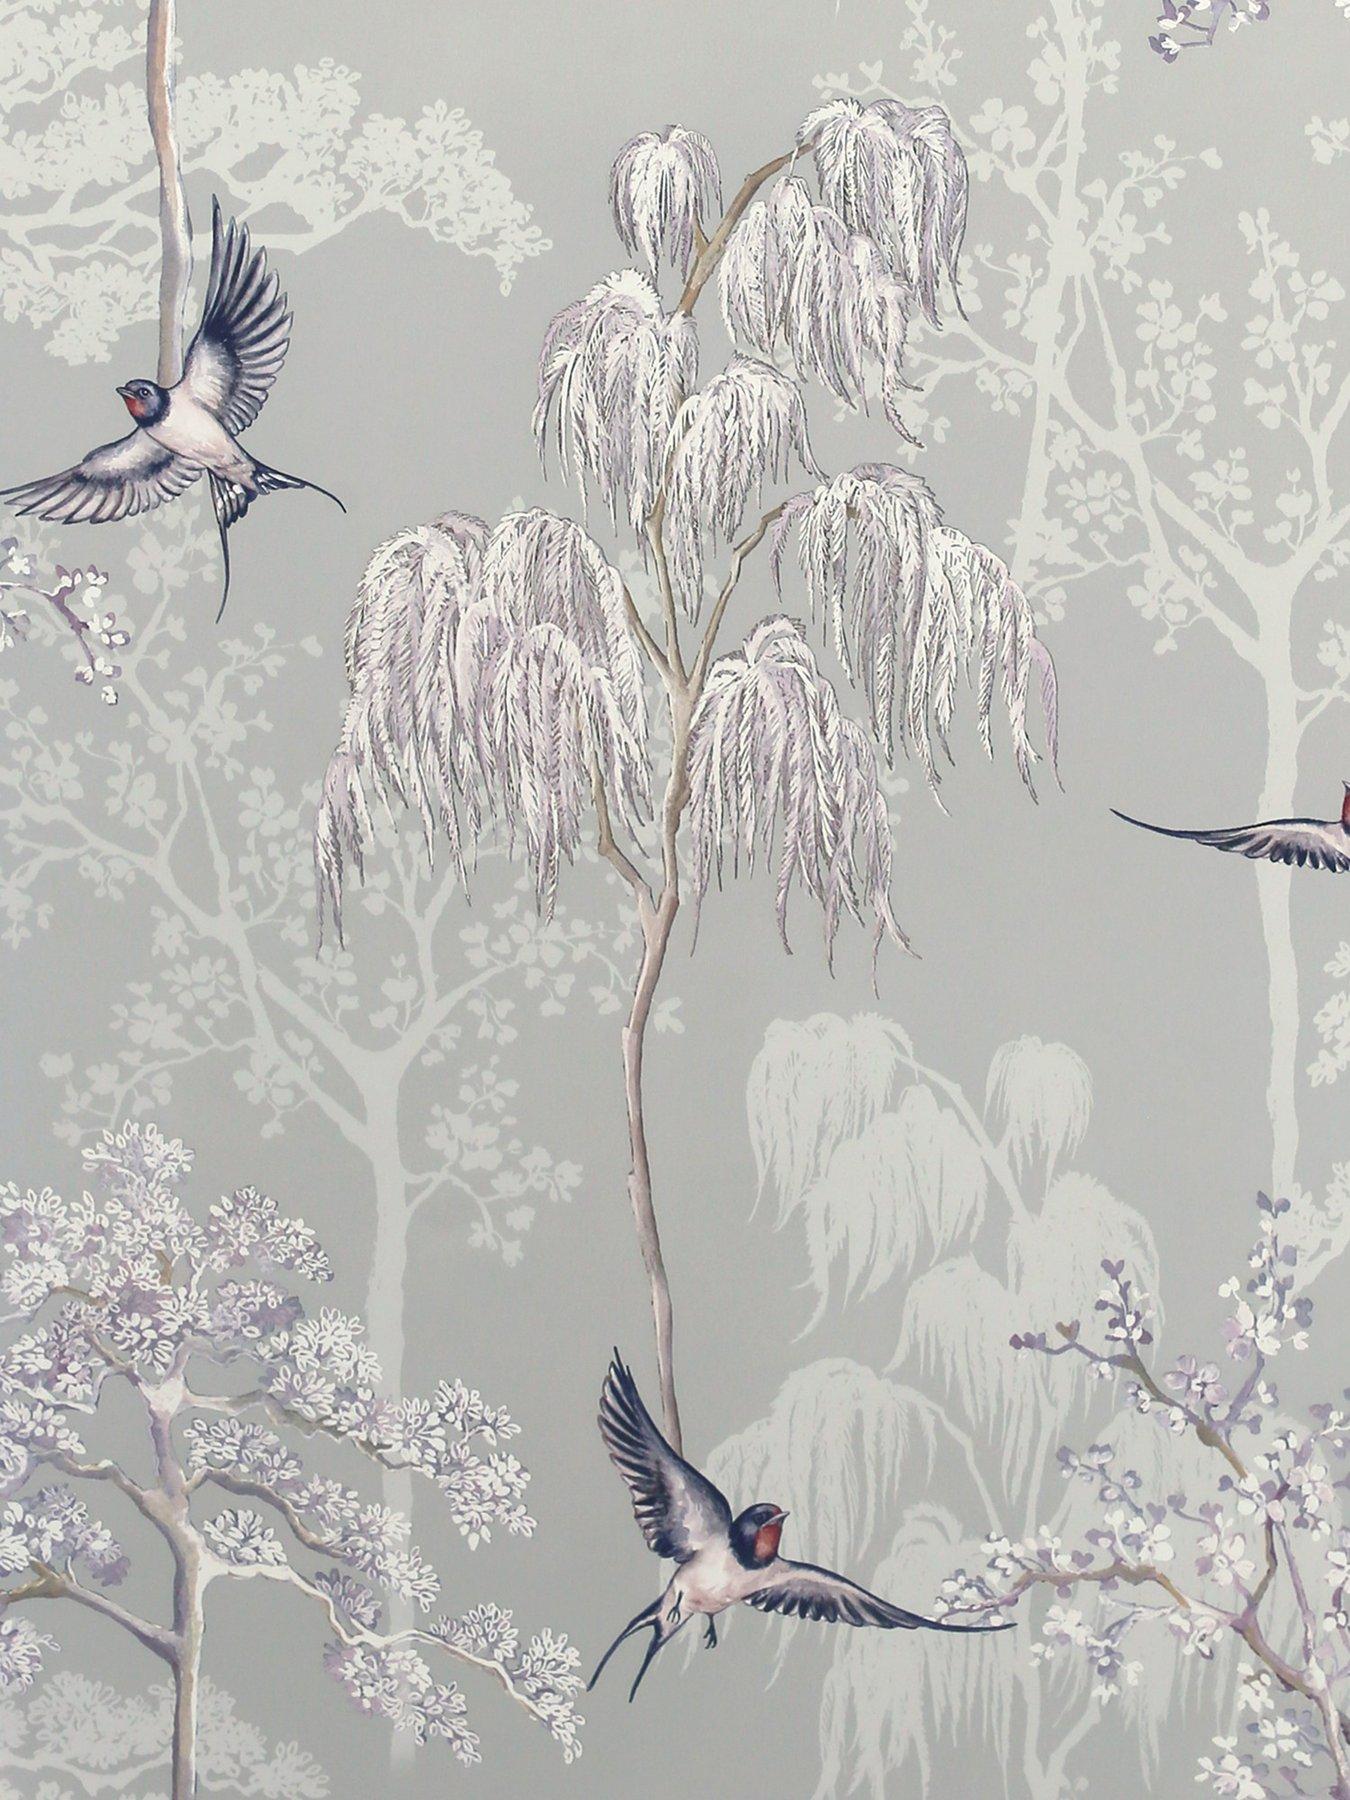 Dreamy Vintage Birds Black Floral Paper Non-Pasted Strippable Wallpaper  Roll (Covers 57 Sq. Ft.)Removable Wallpaper. Double Roll